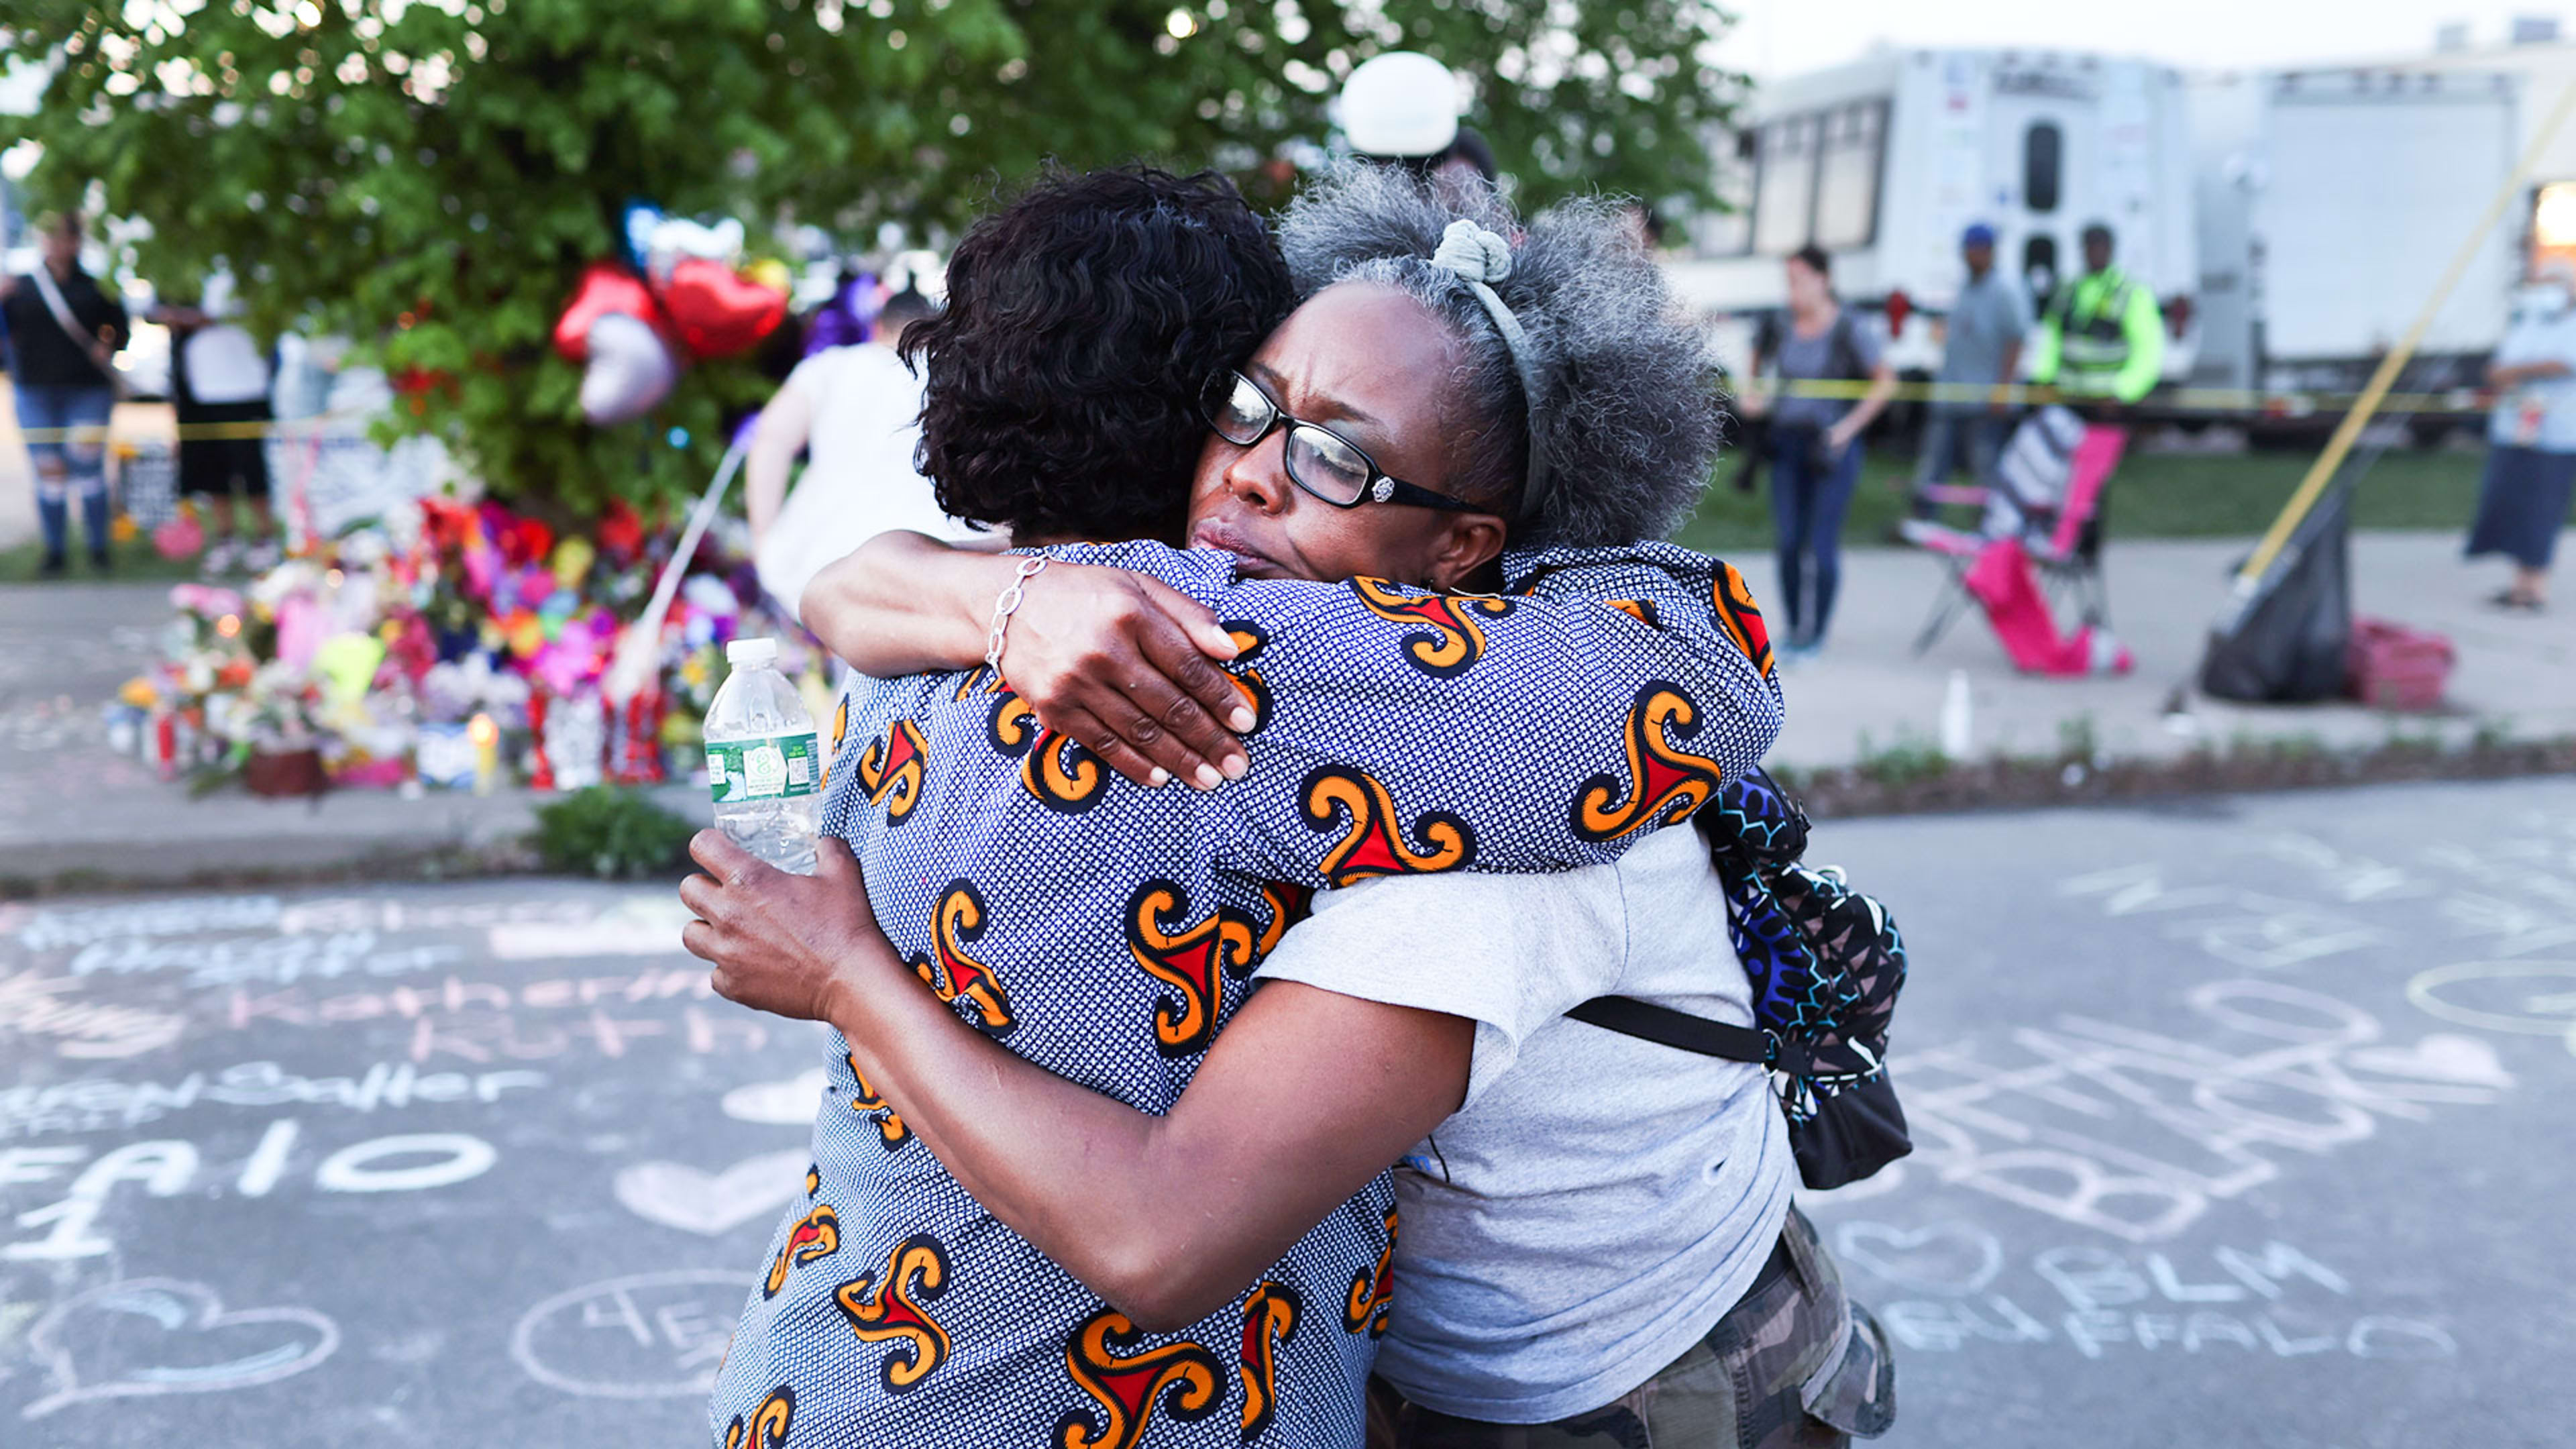 How to help Buffalo shooting victims and families: 5 things you can do right now